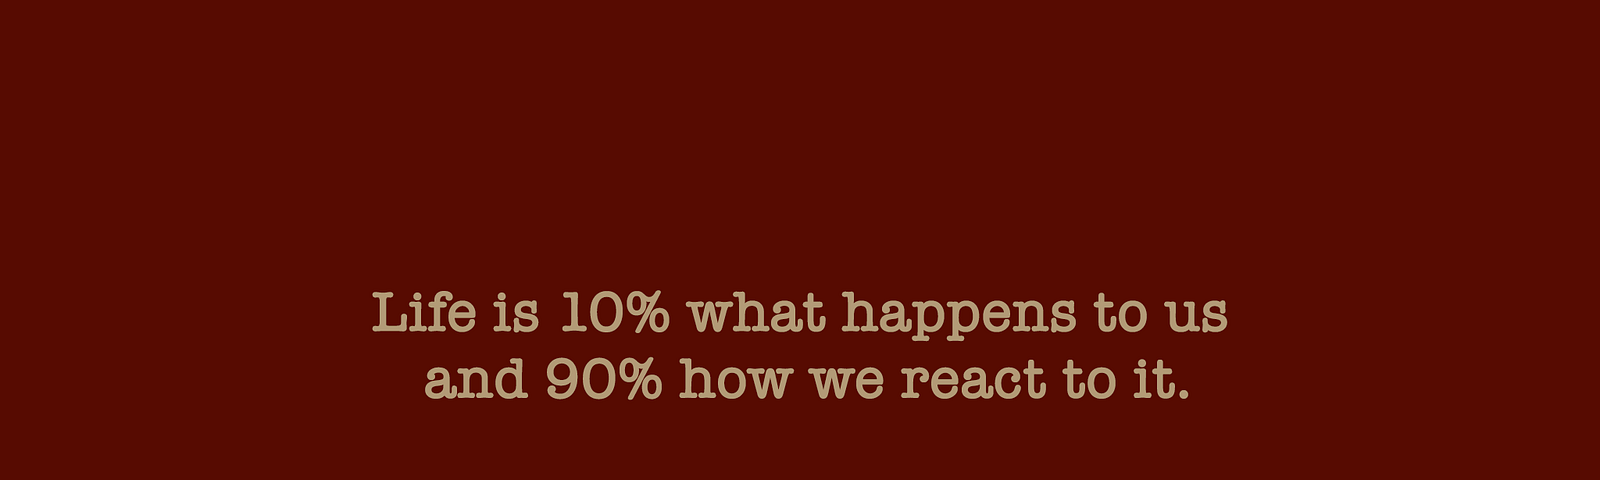 “Life is 10% what happens to us and 90% how we react to it”